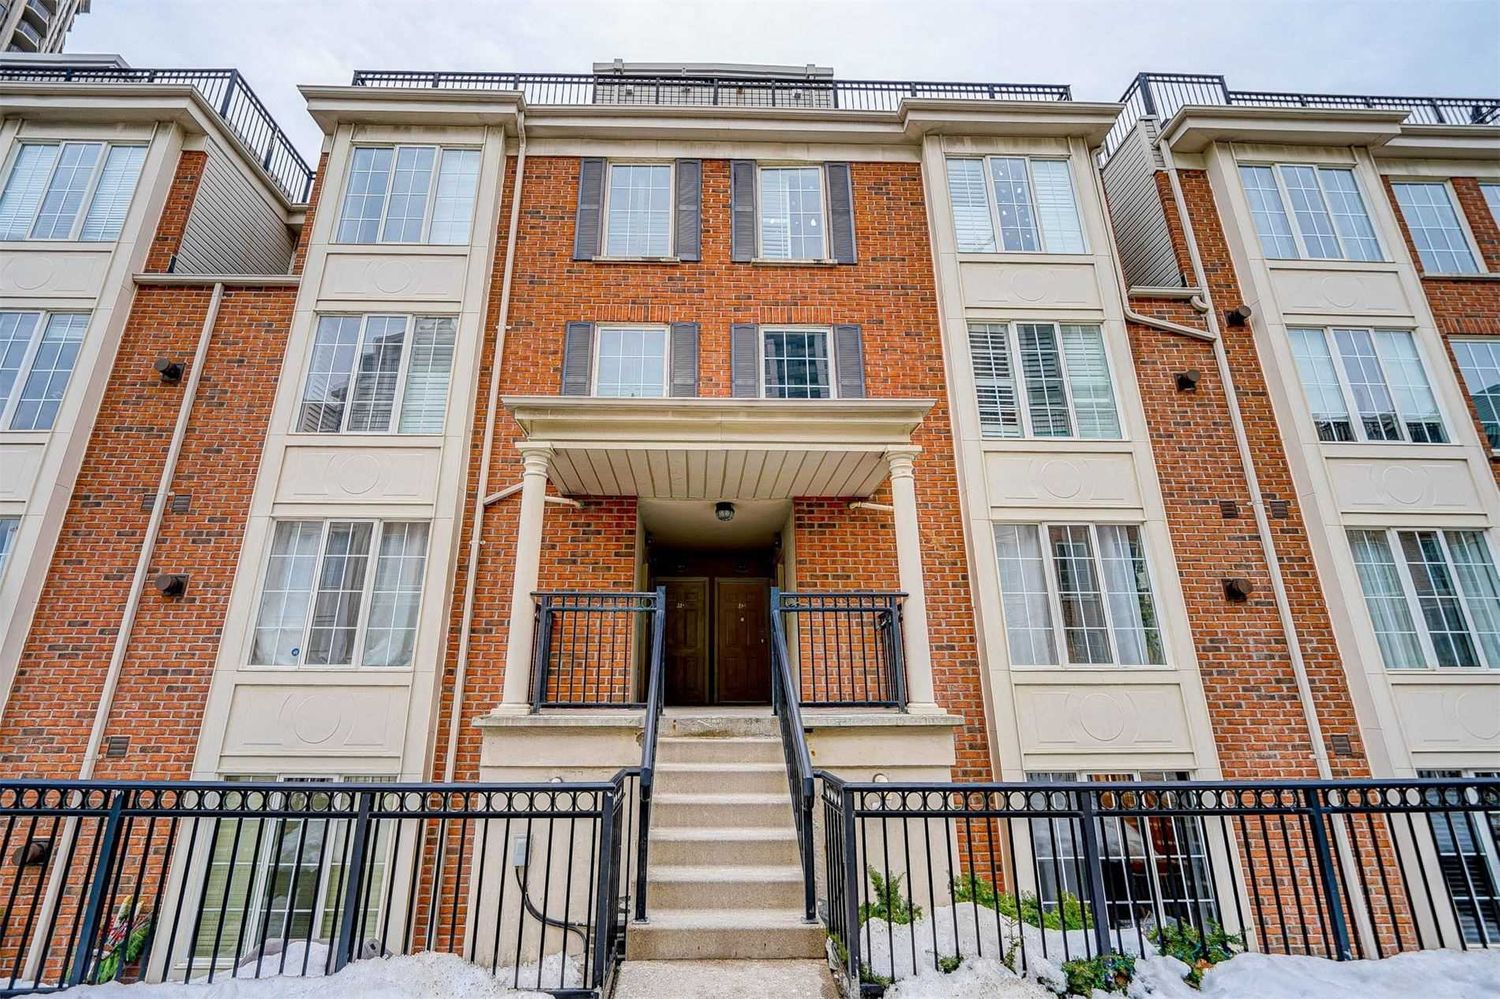 3 Everson Drive. Everson Townhomes is located in  North York, Toronto - image #1 of 2